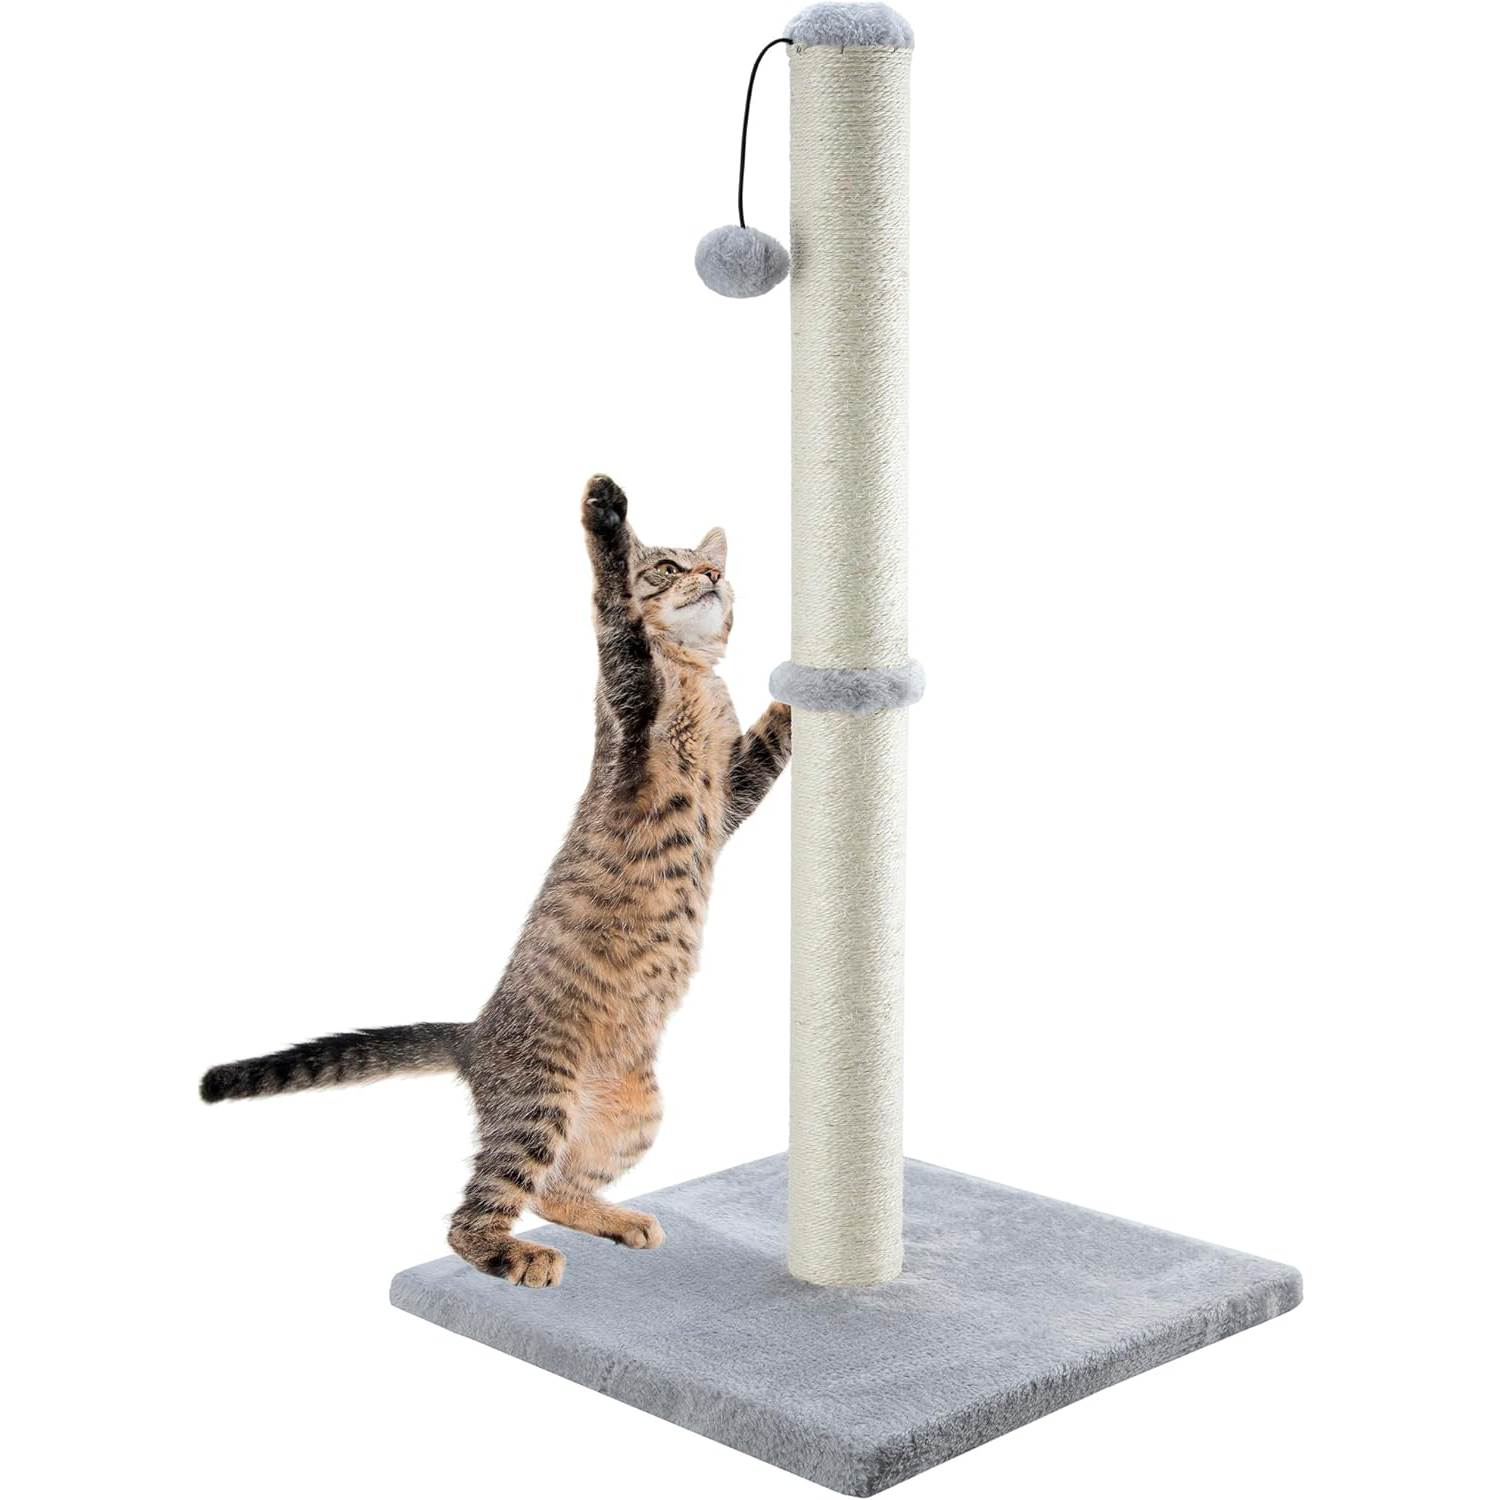 Dimaka 86 cm Tall Ultimate Cat Scratching Post, Claw Scratcher with Sisal Rope and Covered with Soft Smooth Plush, Vertical Scratch New